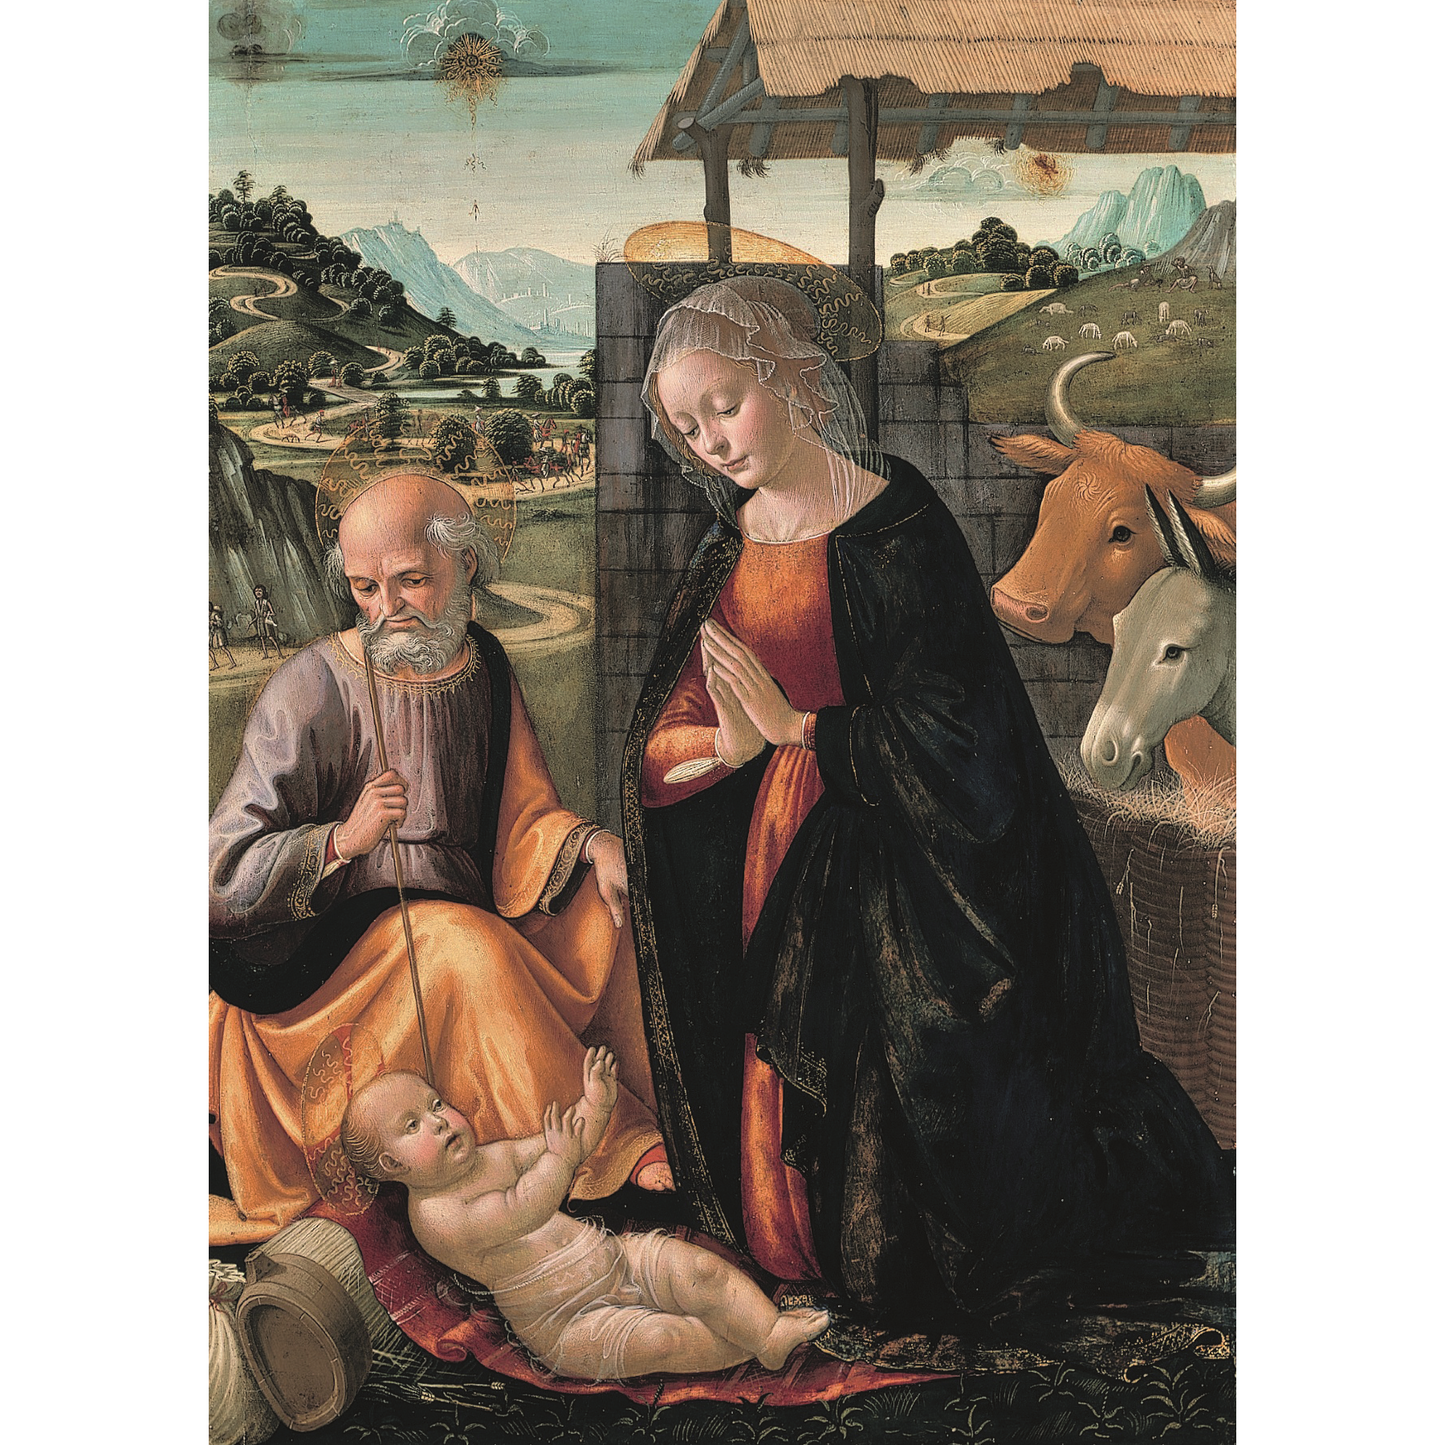 Rectangular Christmas card, portrait format. Nativity scene of the Adoration of the Christ. By Domenico Ghirlandaio. From the collection of The Fitzwilliam Museum, brought to you by CuratingCambridge.com